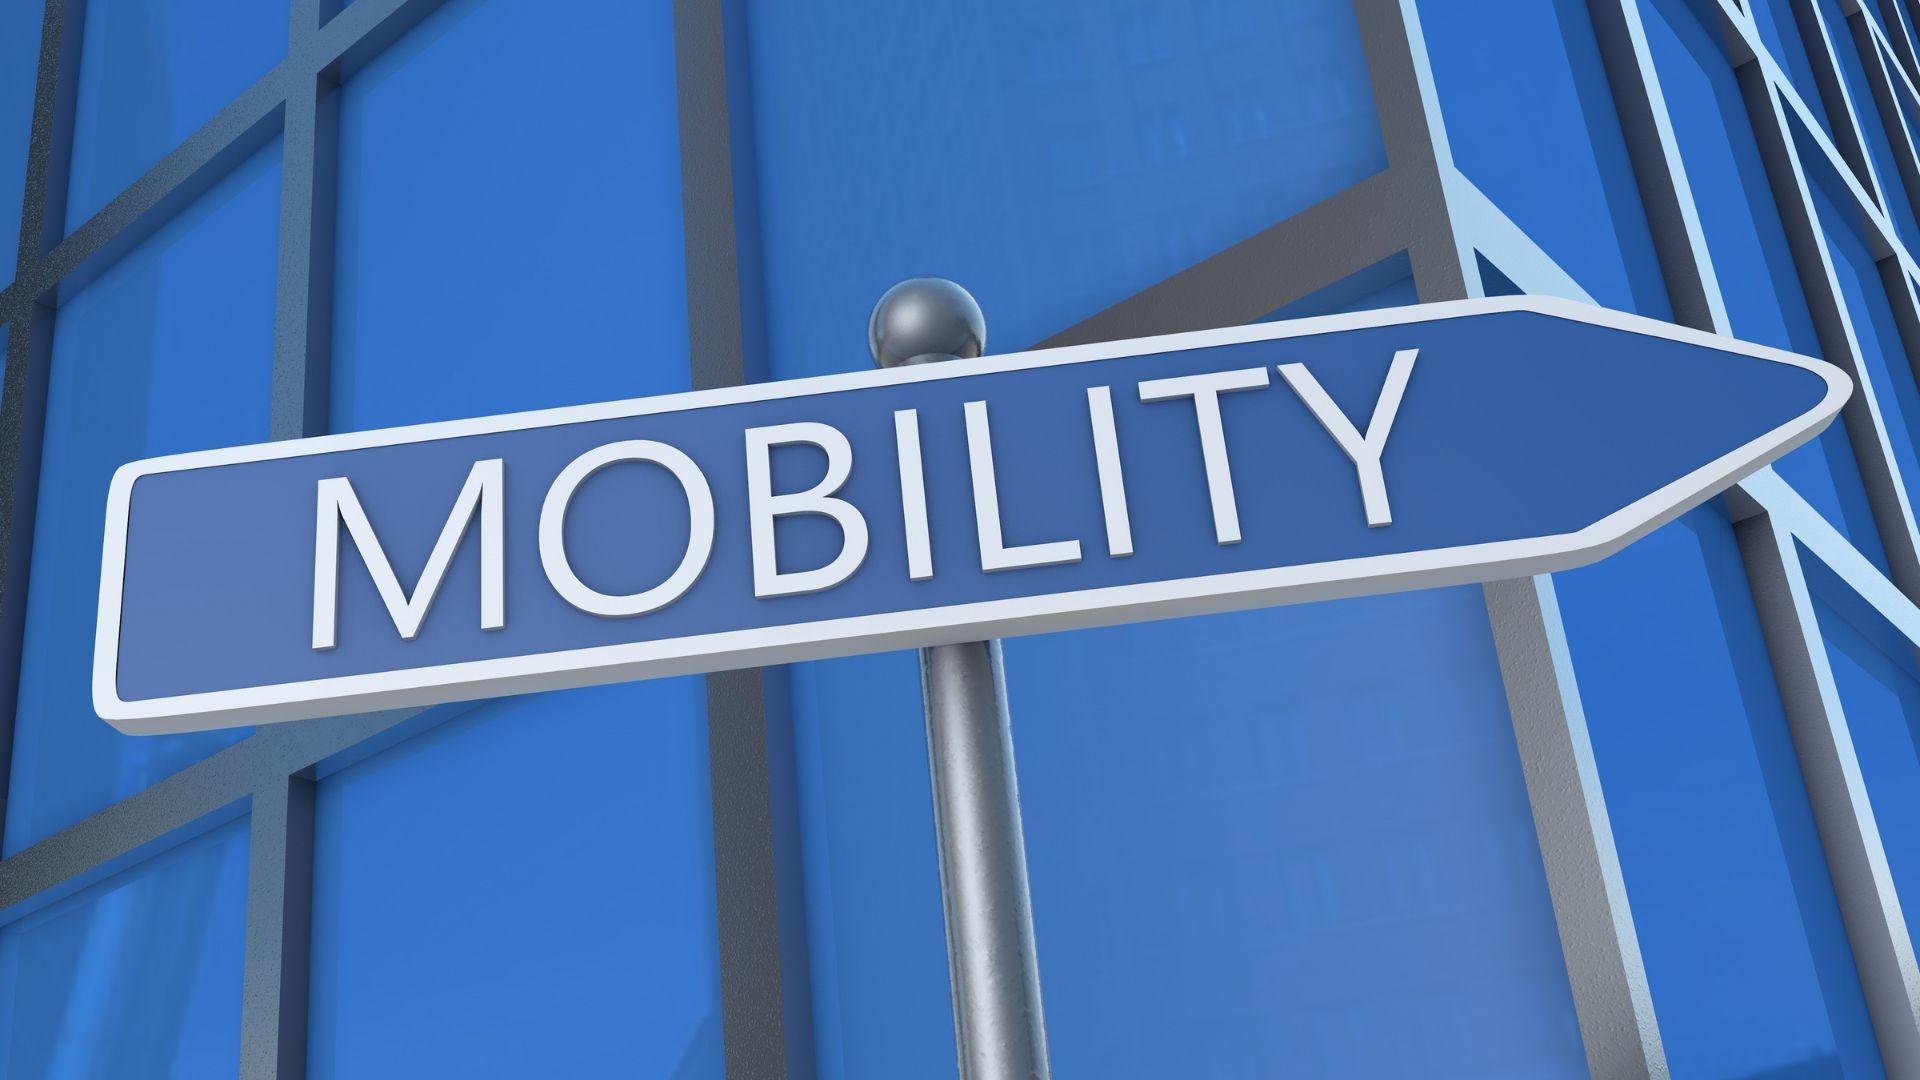 mobility manager